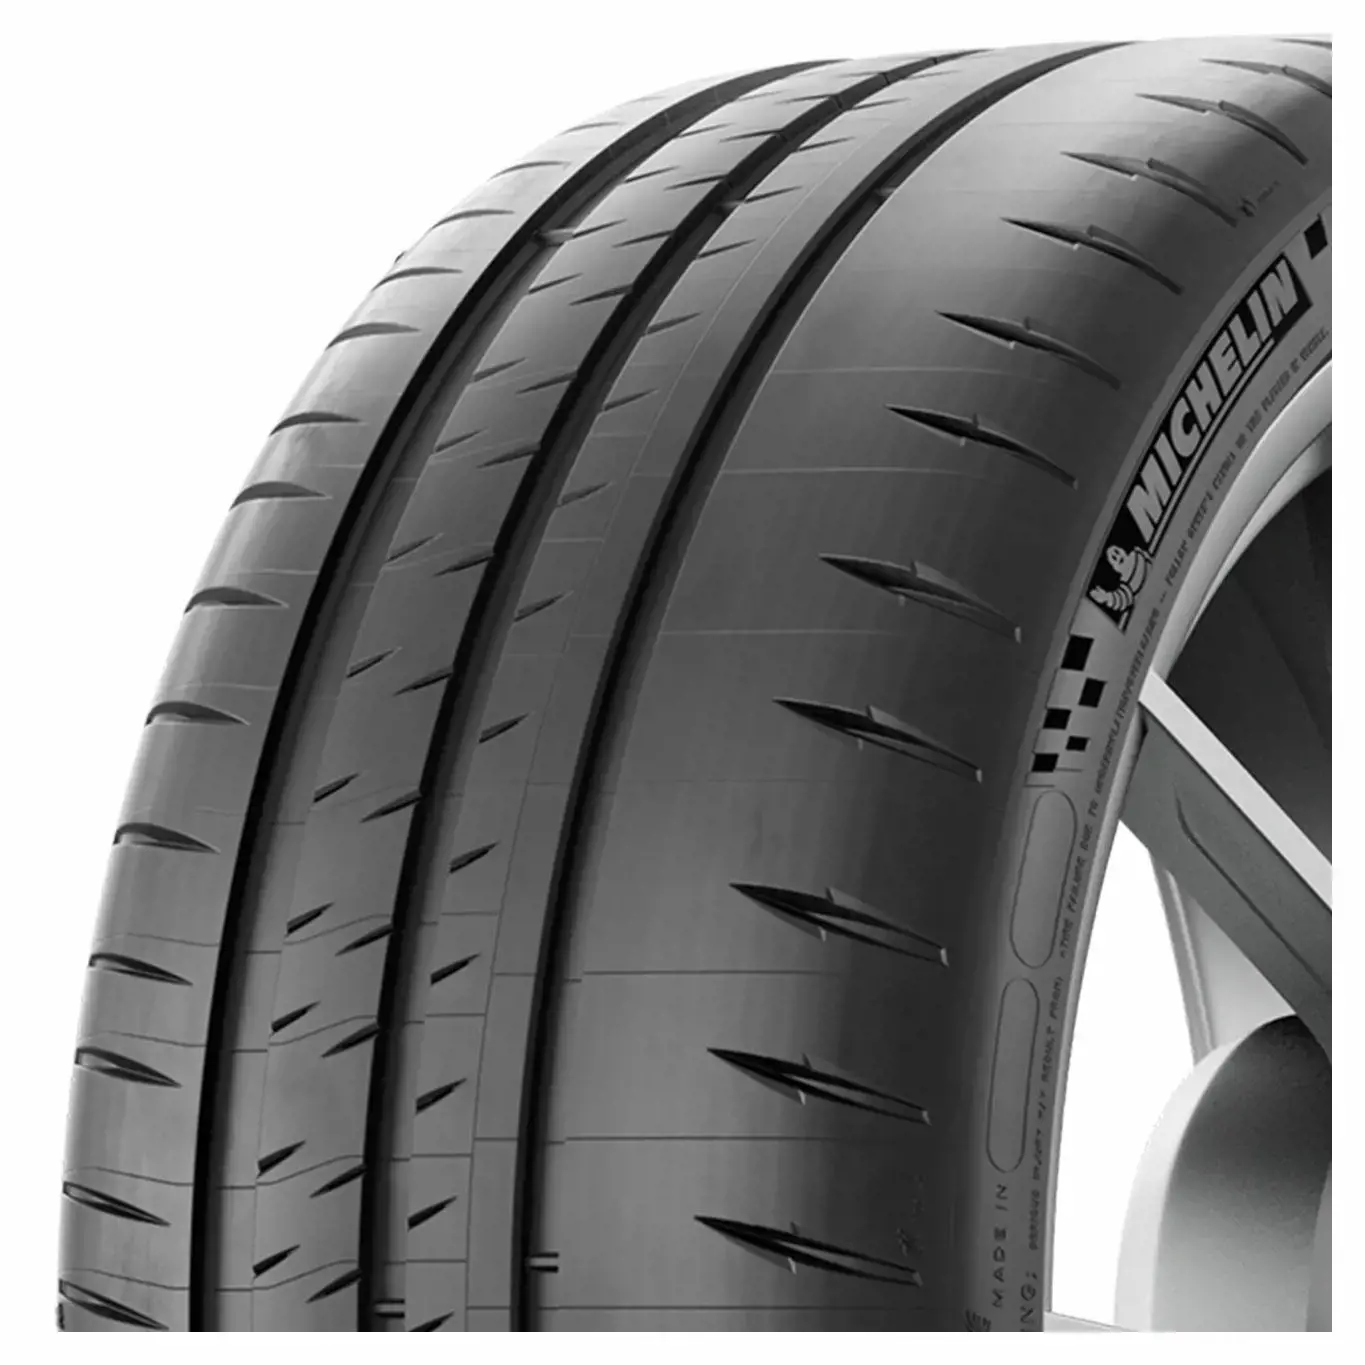 265/35 ZR19 (98Y) Pilot Sport Cup 2 XL UHP